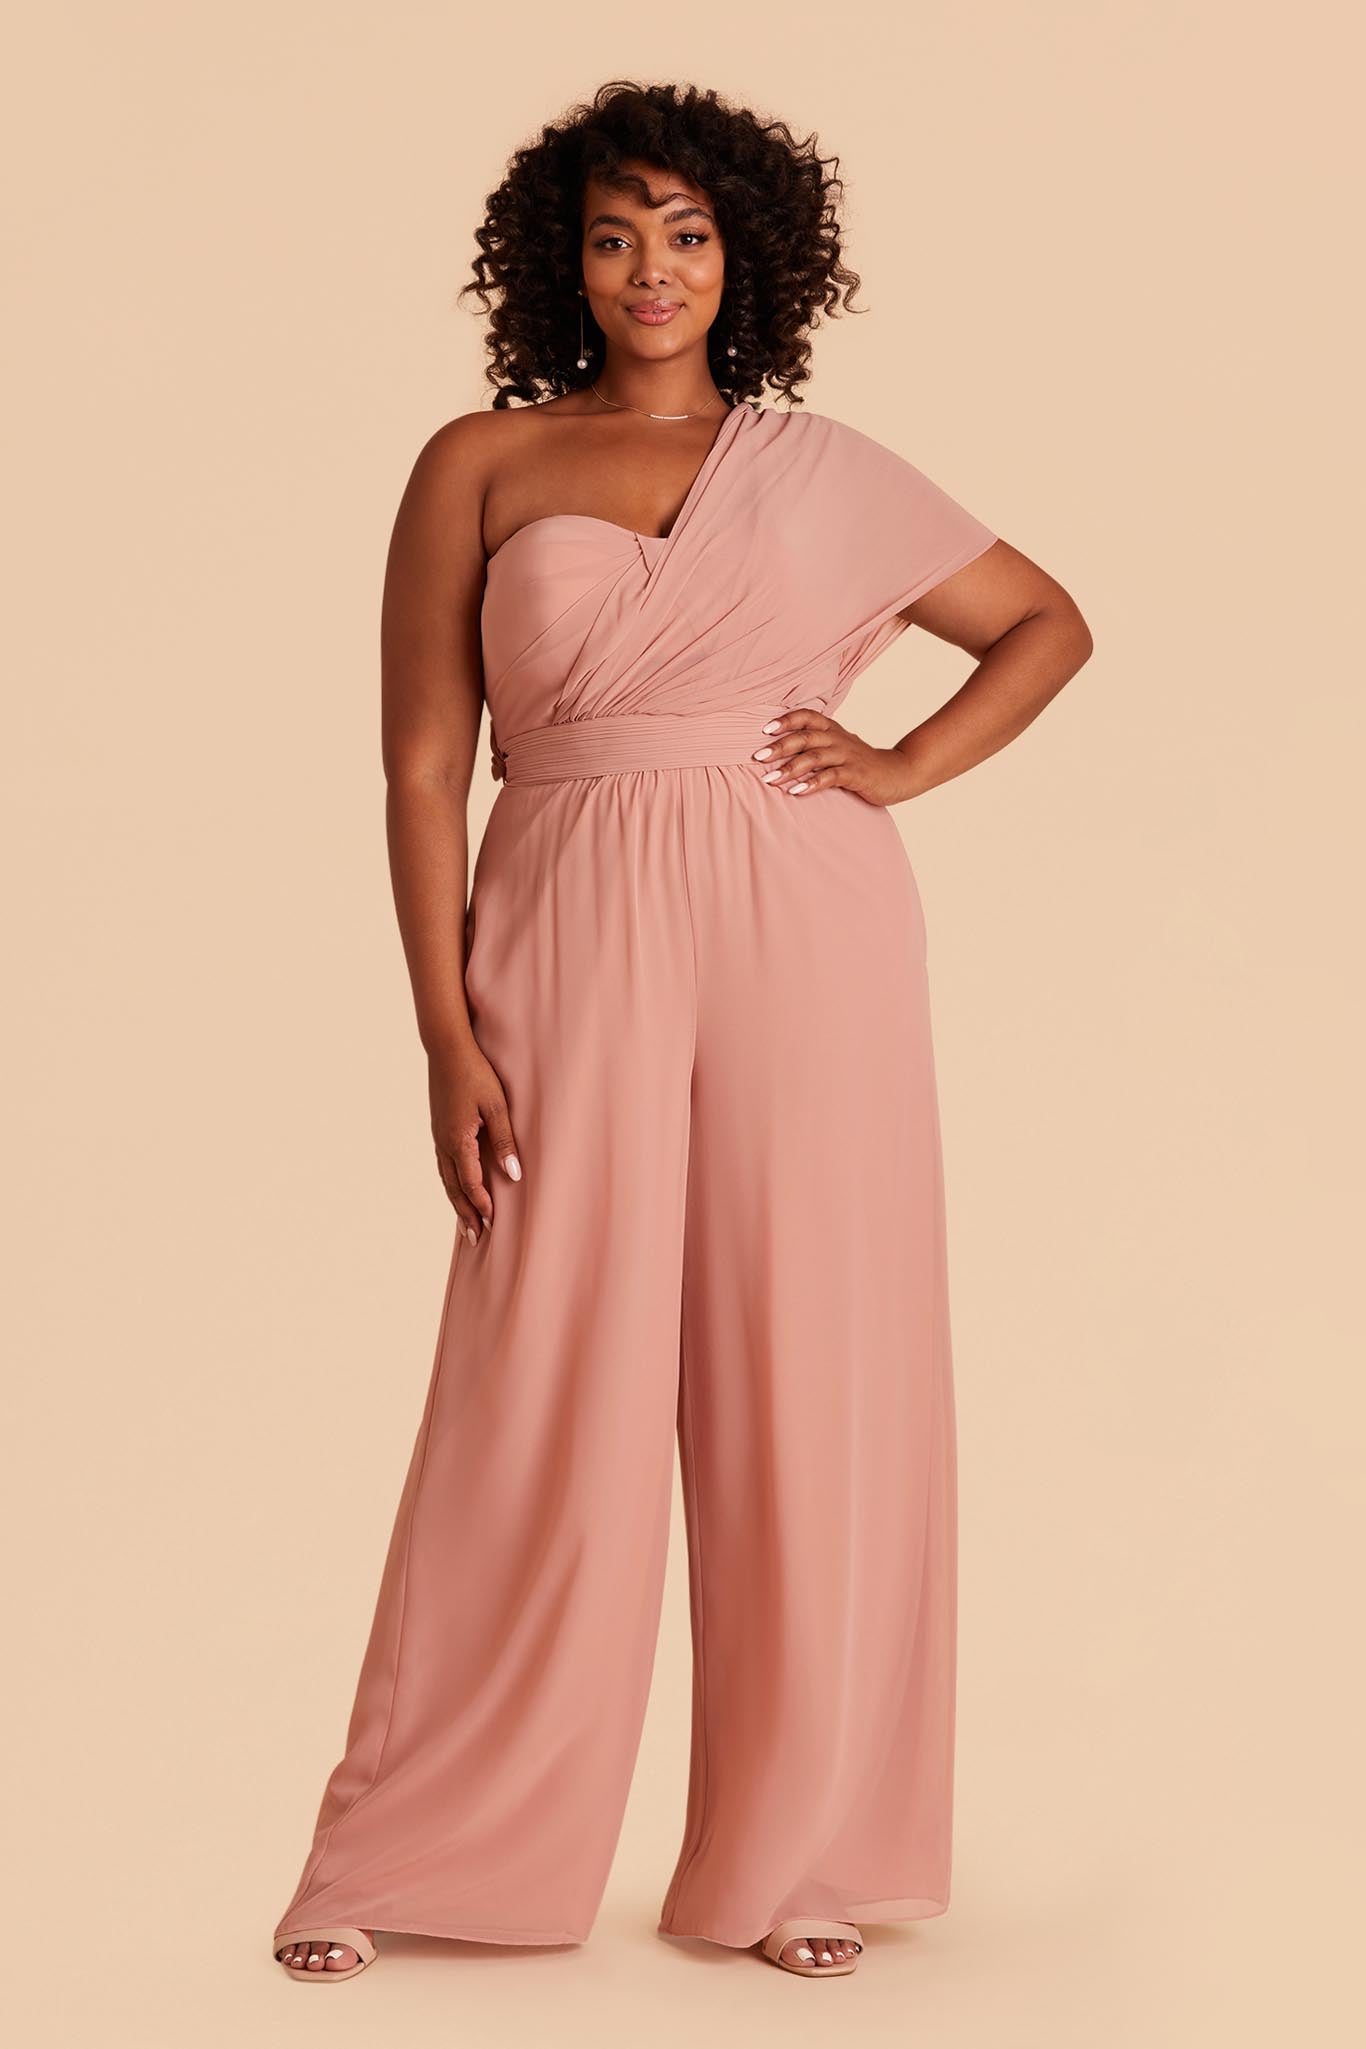 Plus Size Jumpsuits for Wedding Guests: Our 18 Top Picks